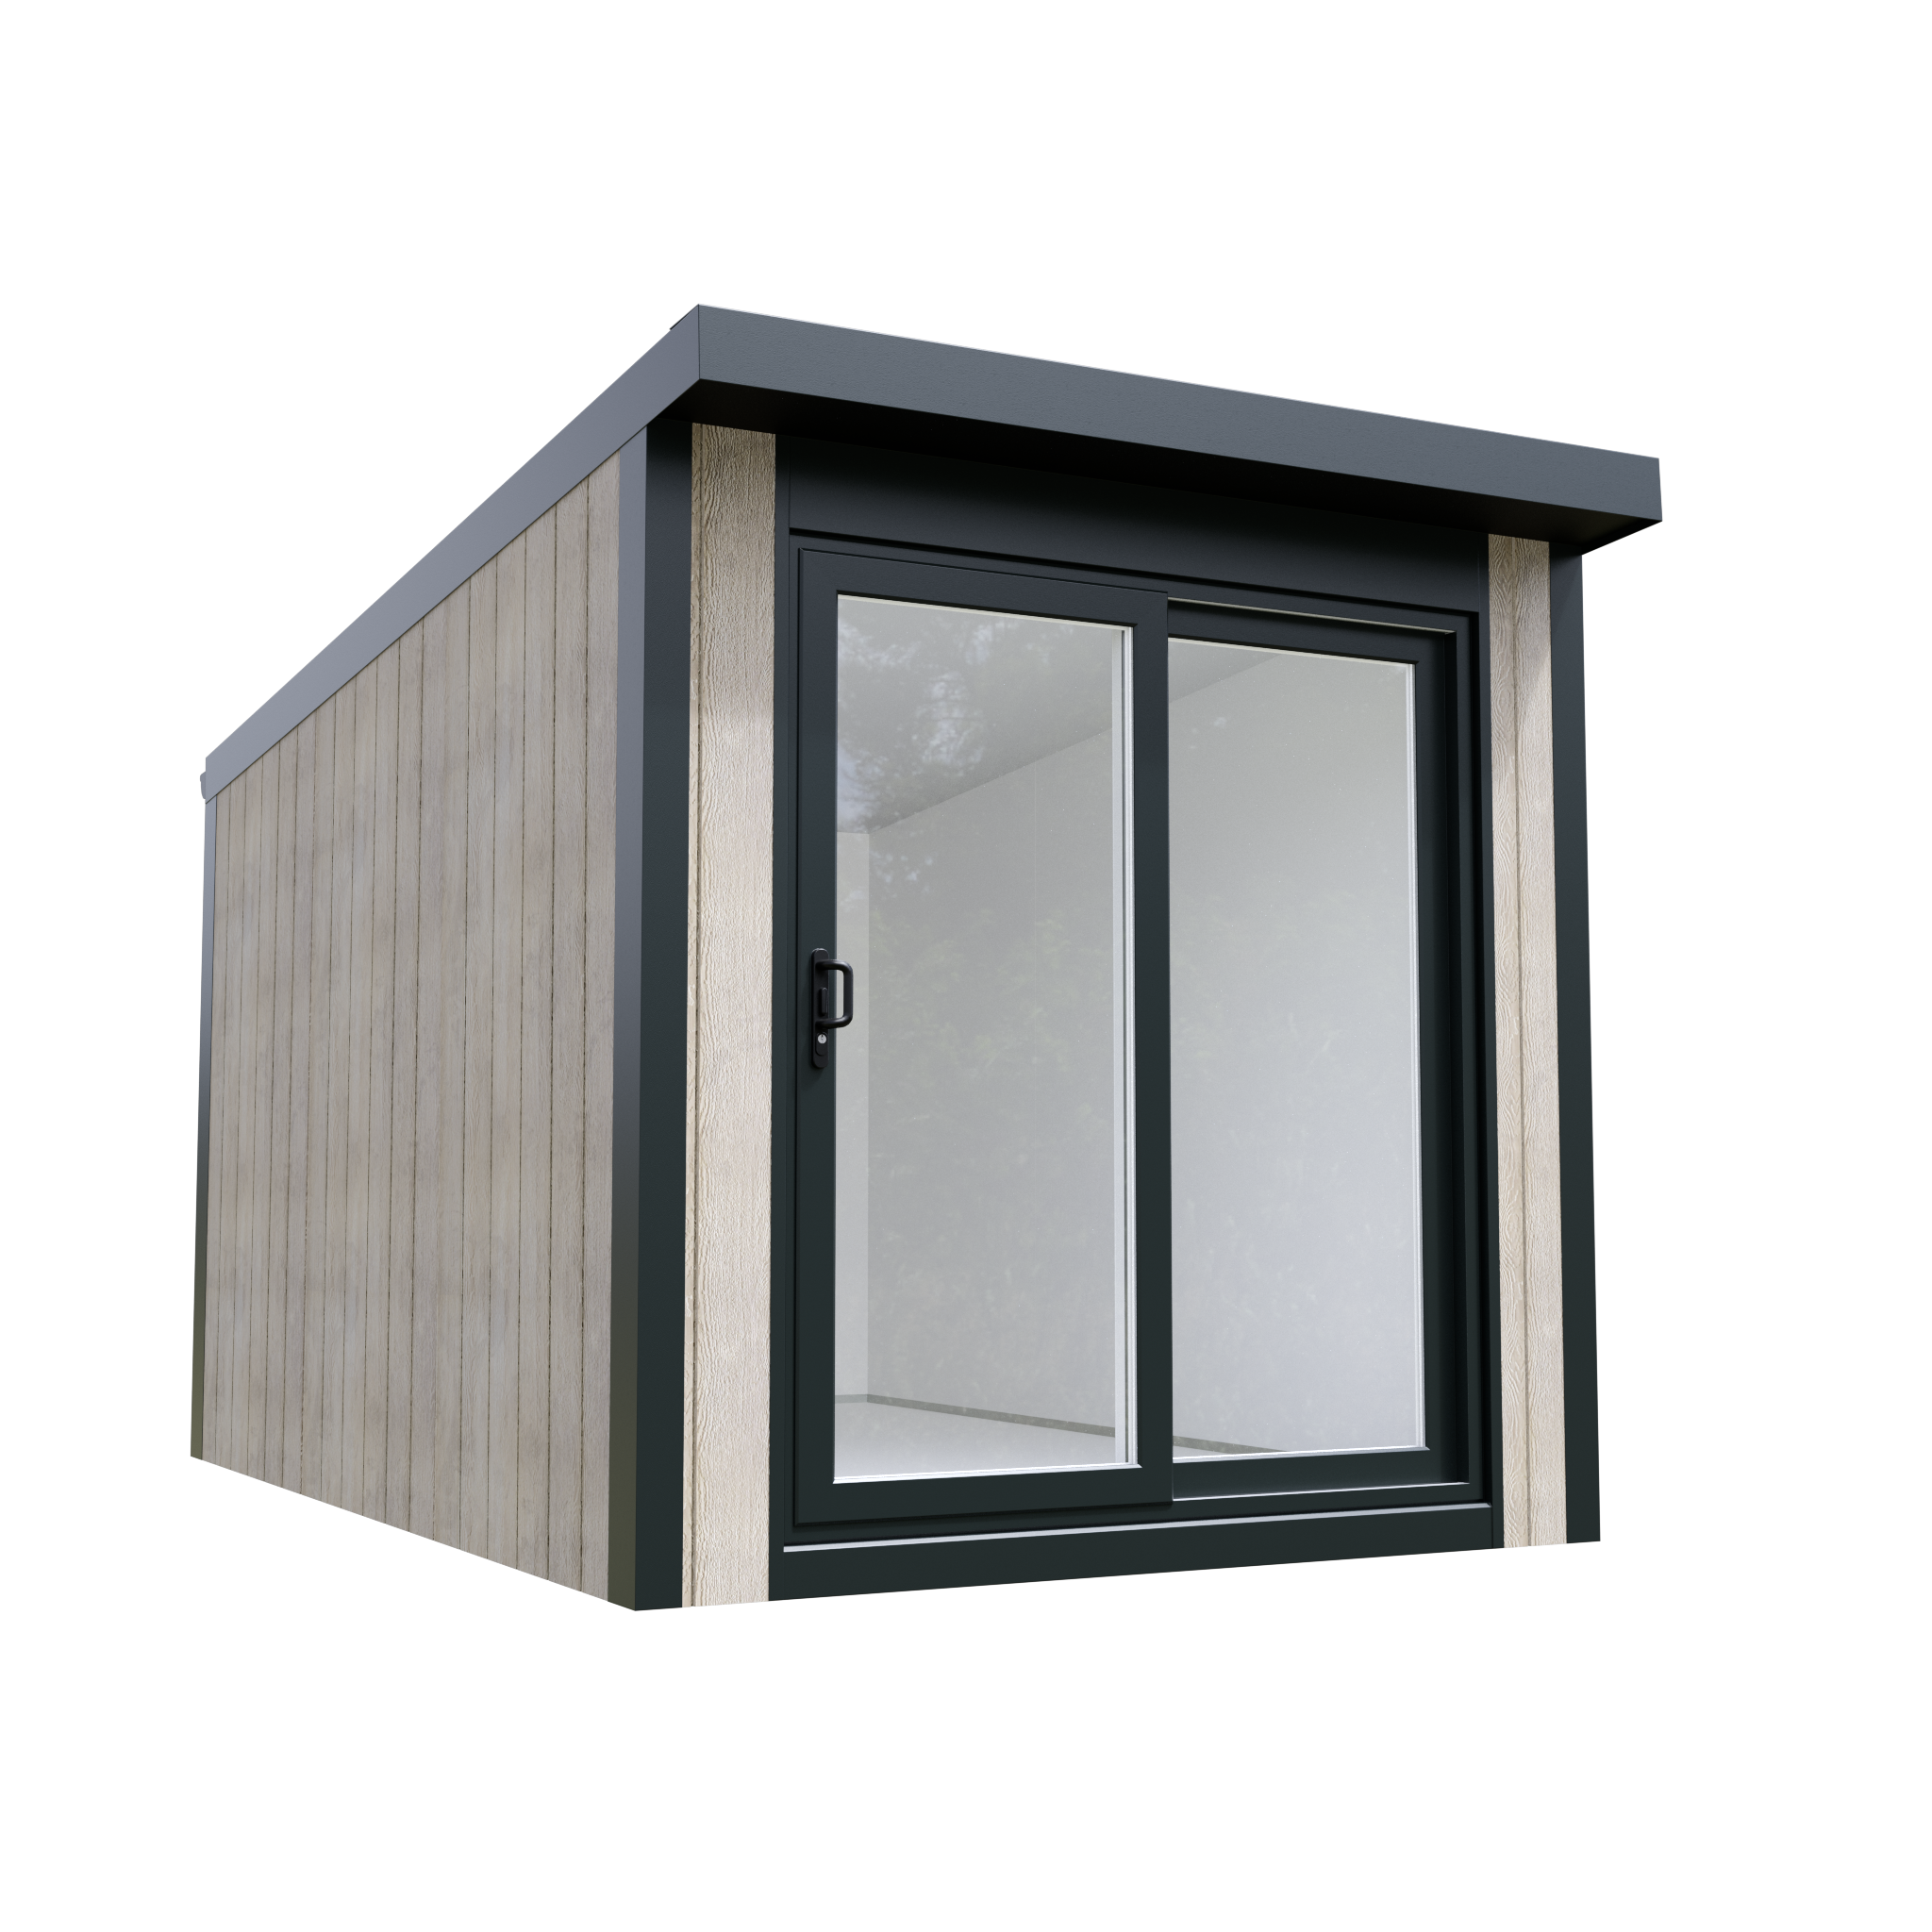 Ideal for narrow spaces, the Long Pod can blend seamlessly into any garden. 2.44m x 3.66m | 8' x 12'